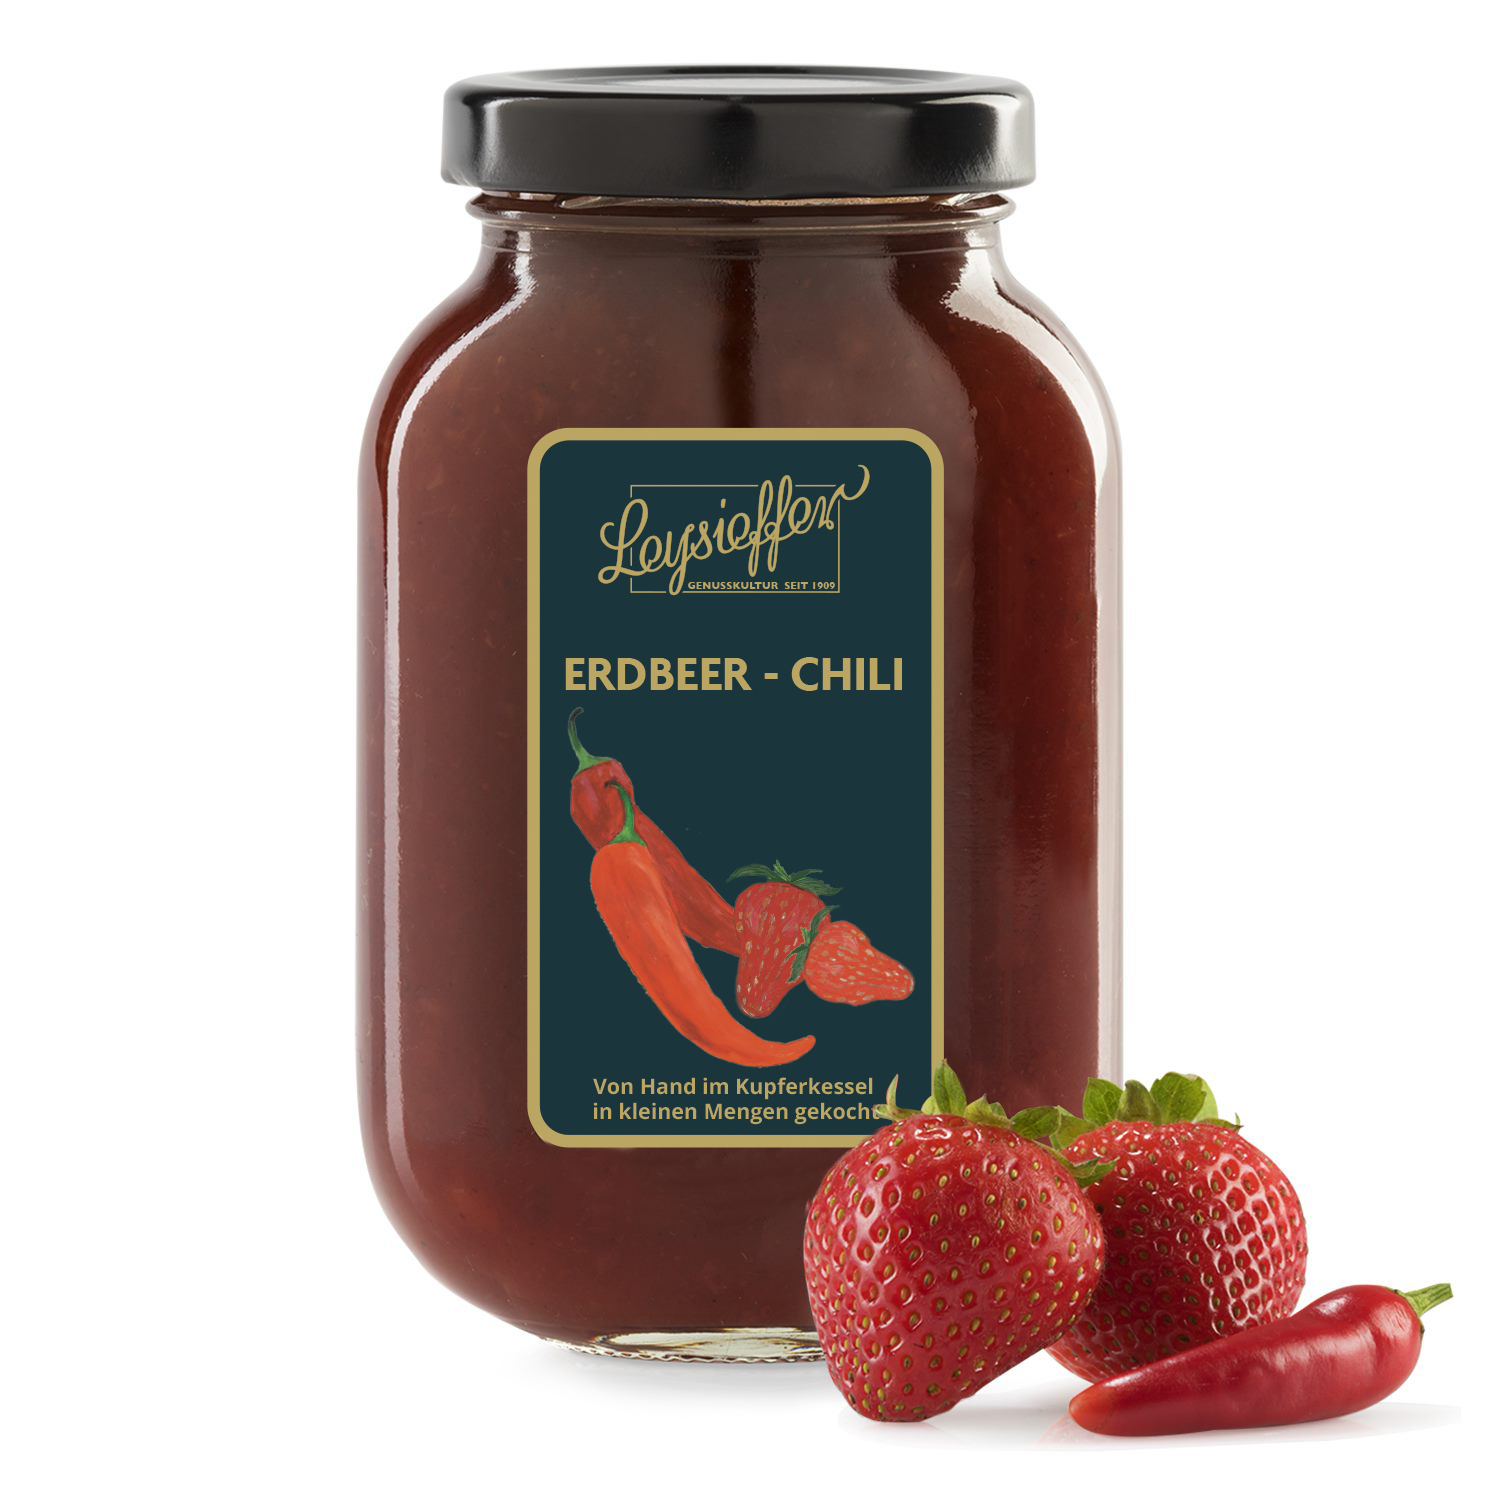 Fruit Spread - Strawberry and Chili